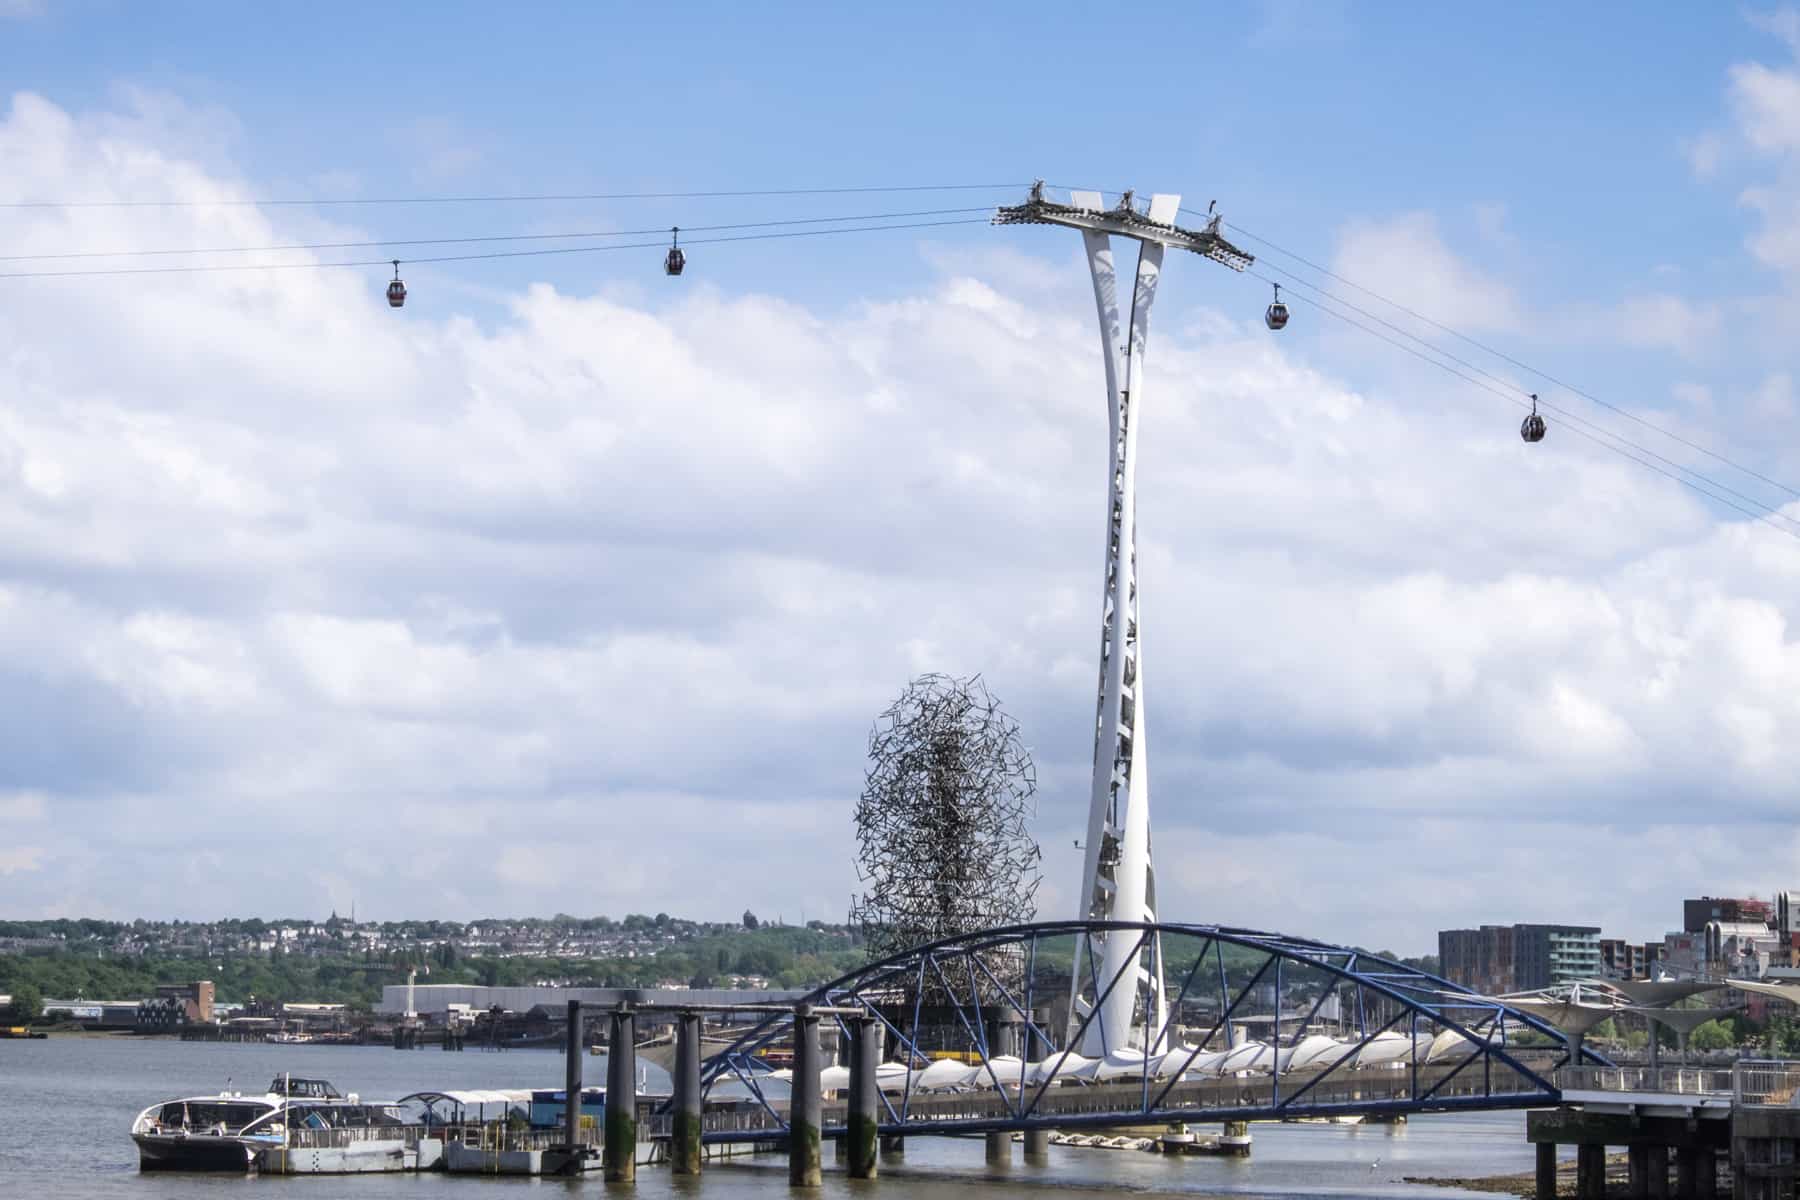 London Cable Cars crossing the Thames with views over the contemporary architecture.